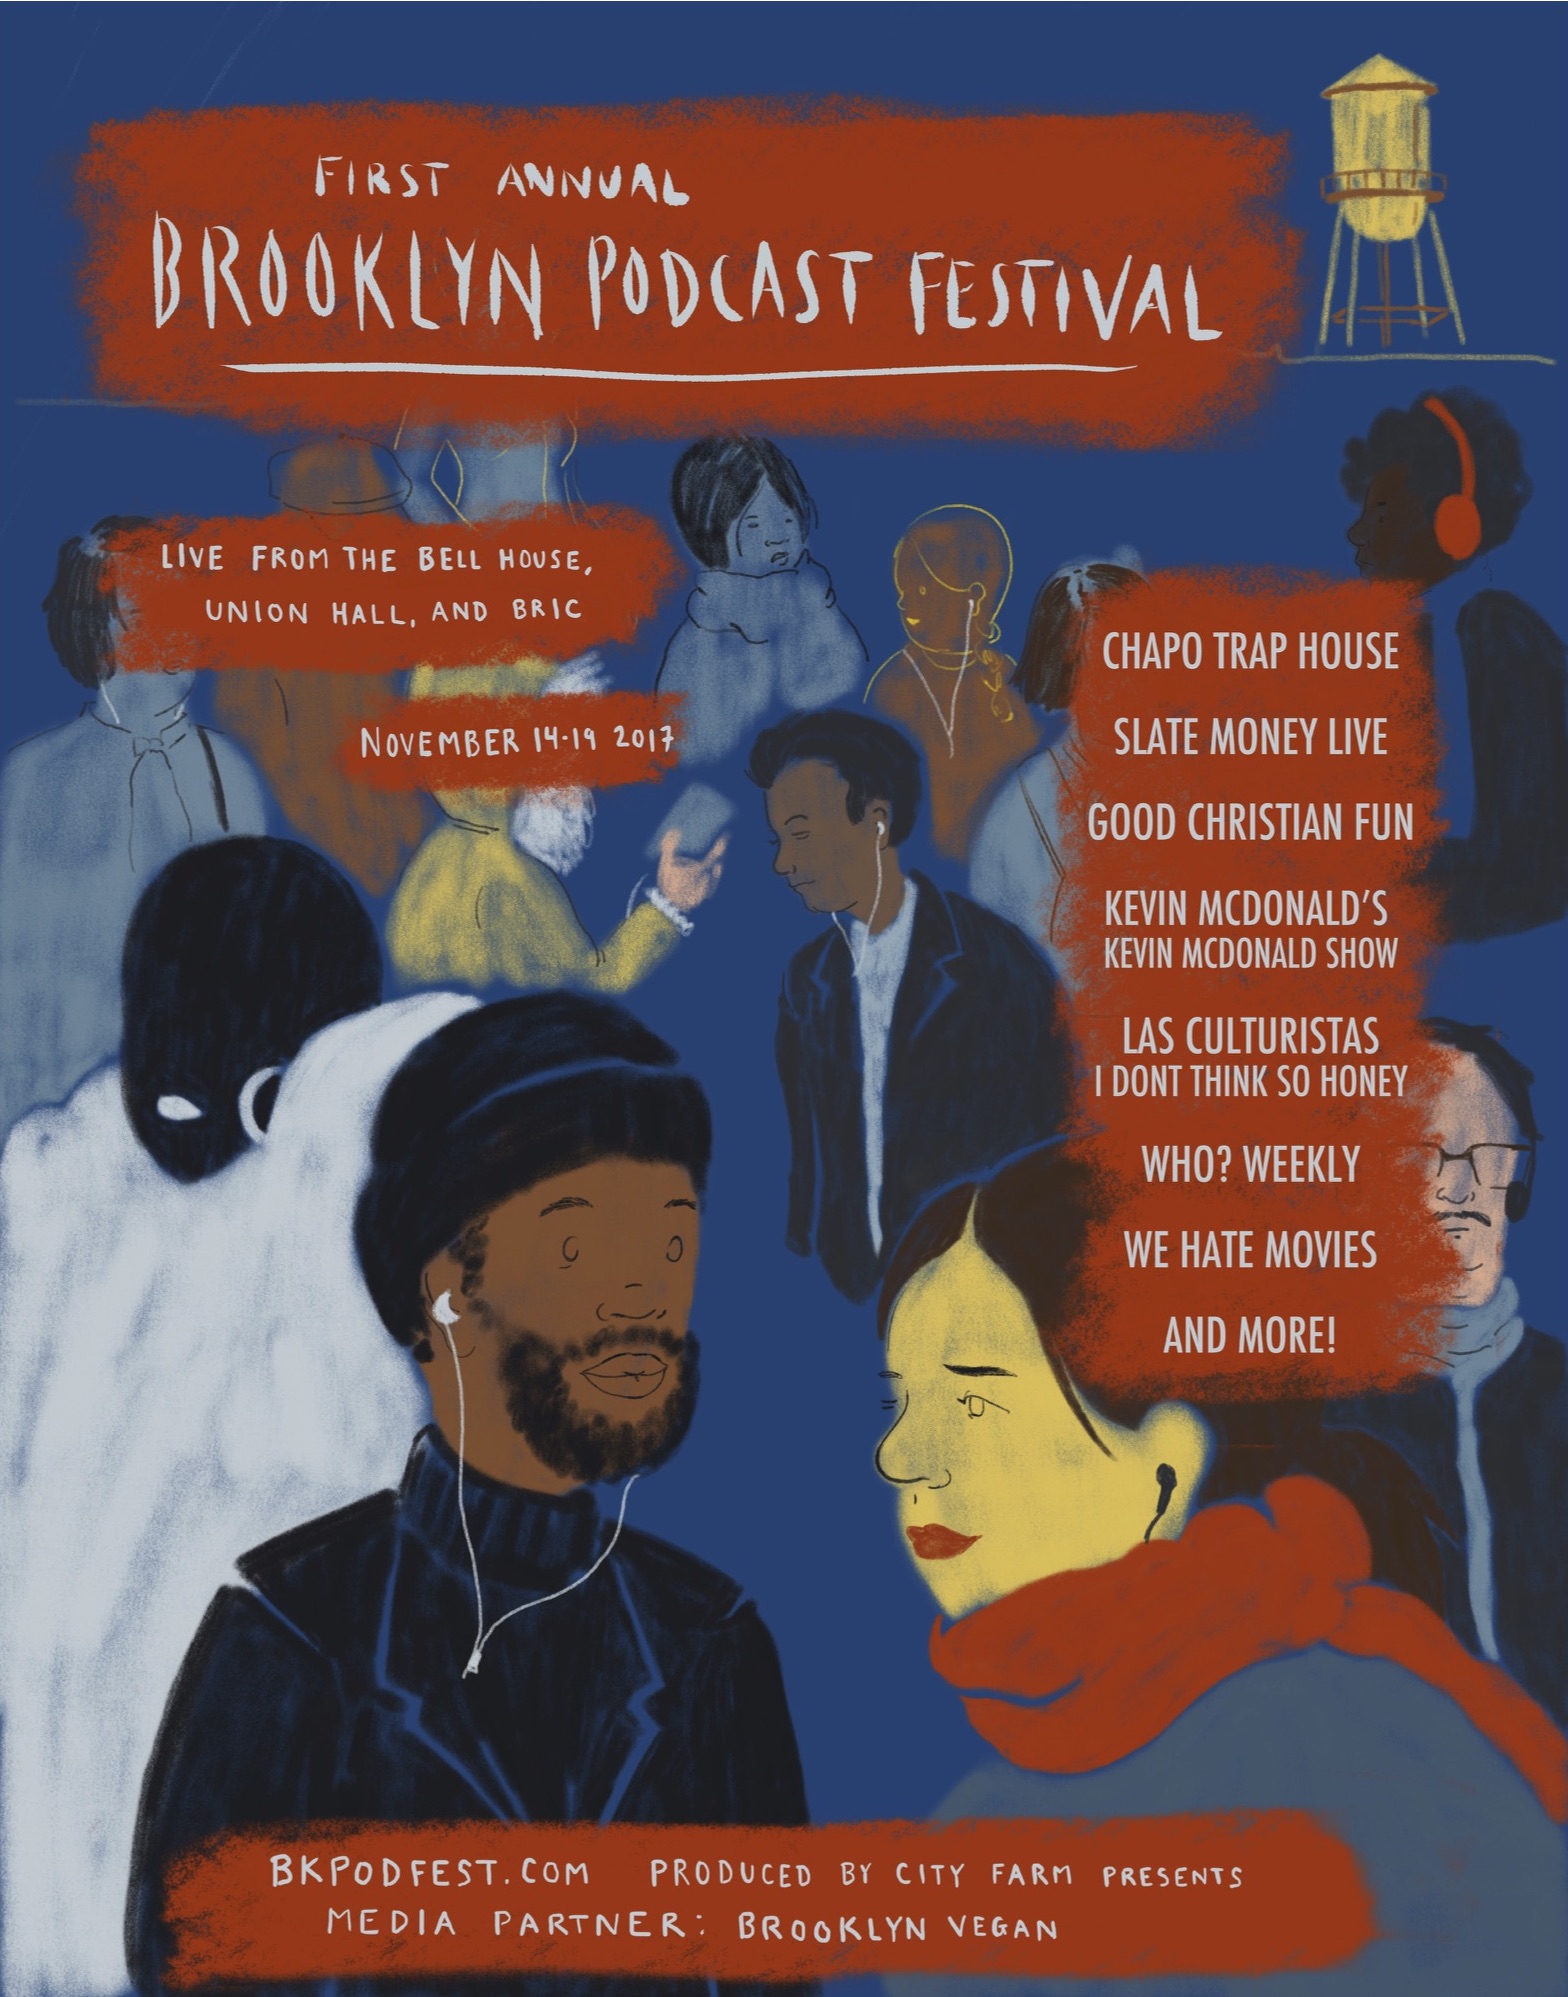 Good Orbit Shows in Brooklyn Podcast Festival